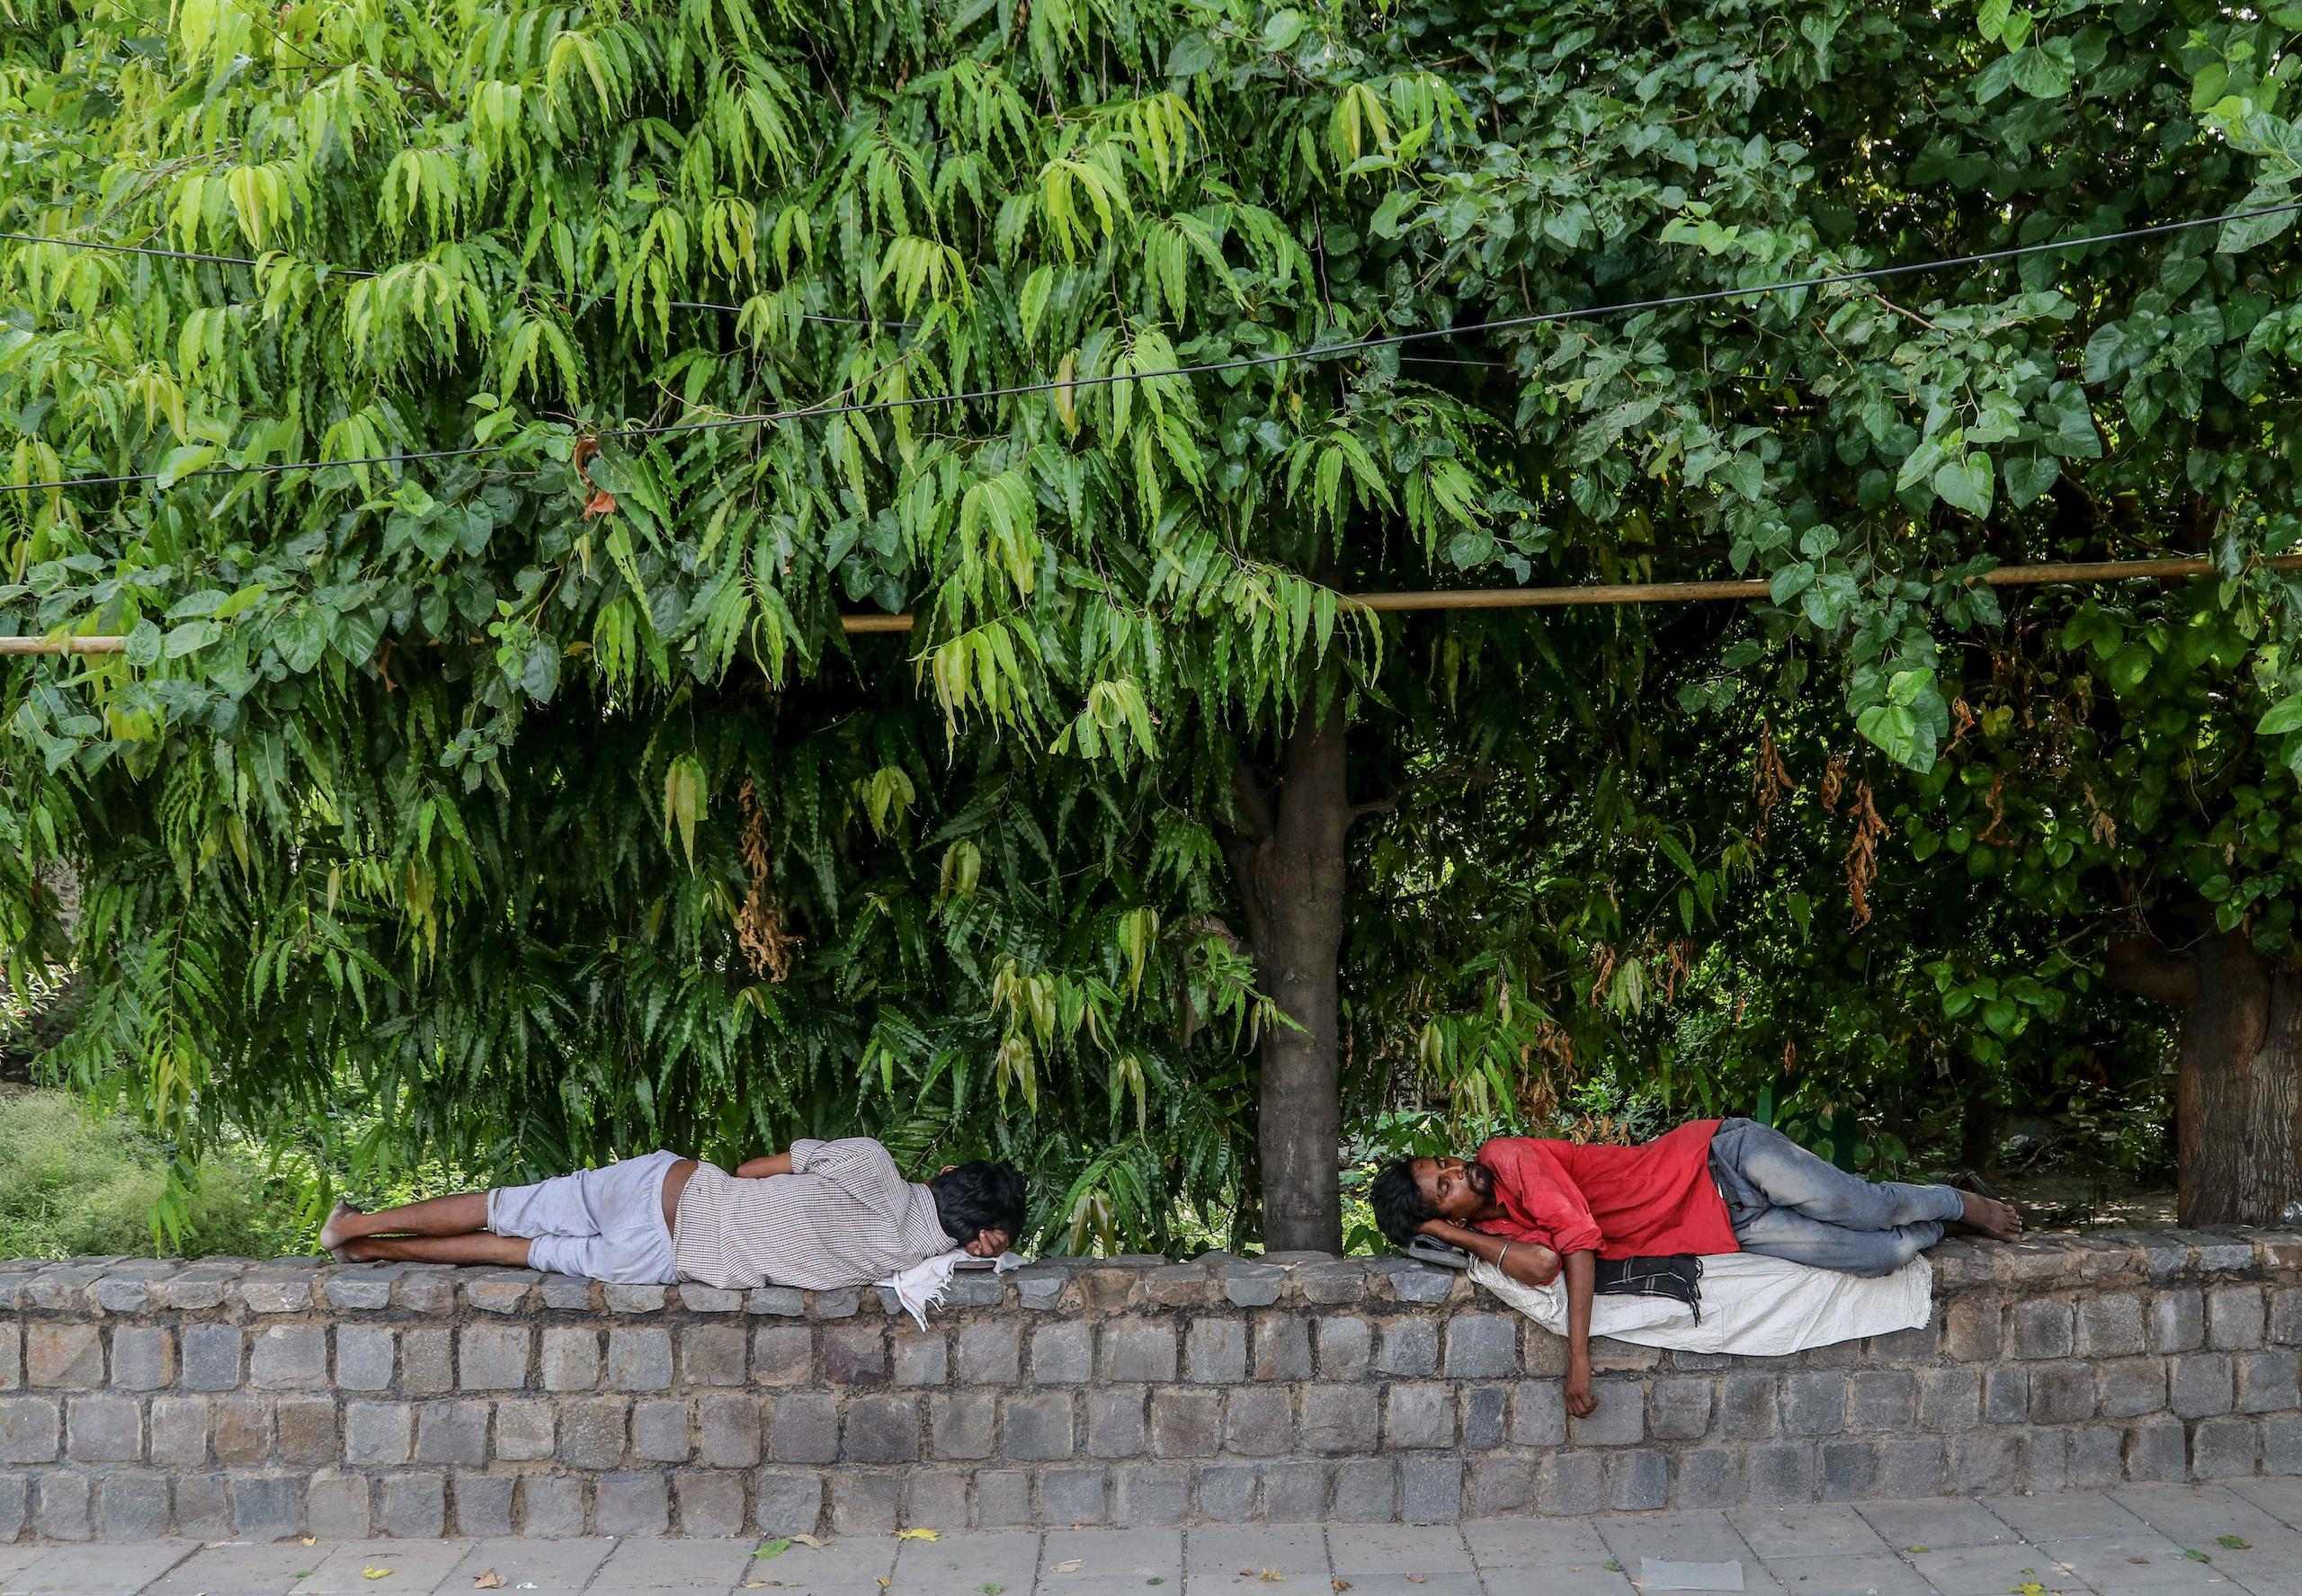 <p>People try to relax under the shade of trees as heatwaves scorch India. (Image: Alamy)</p>